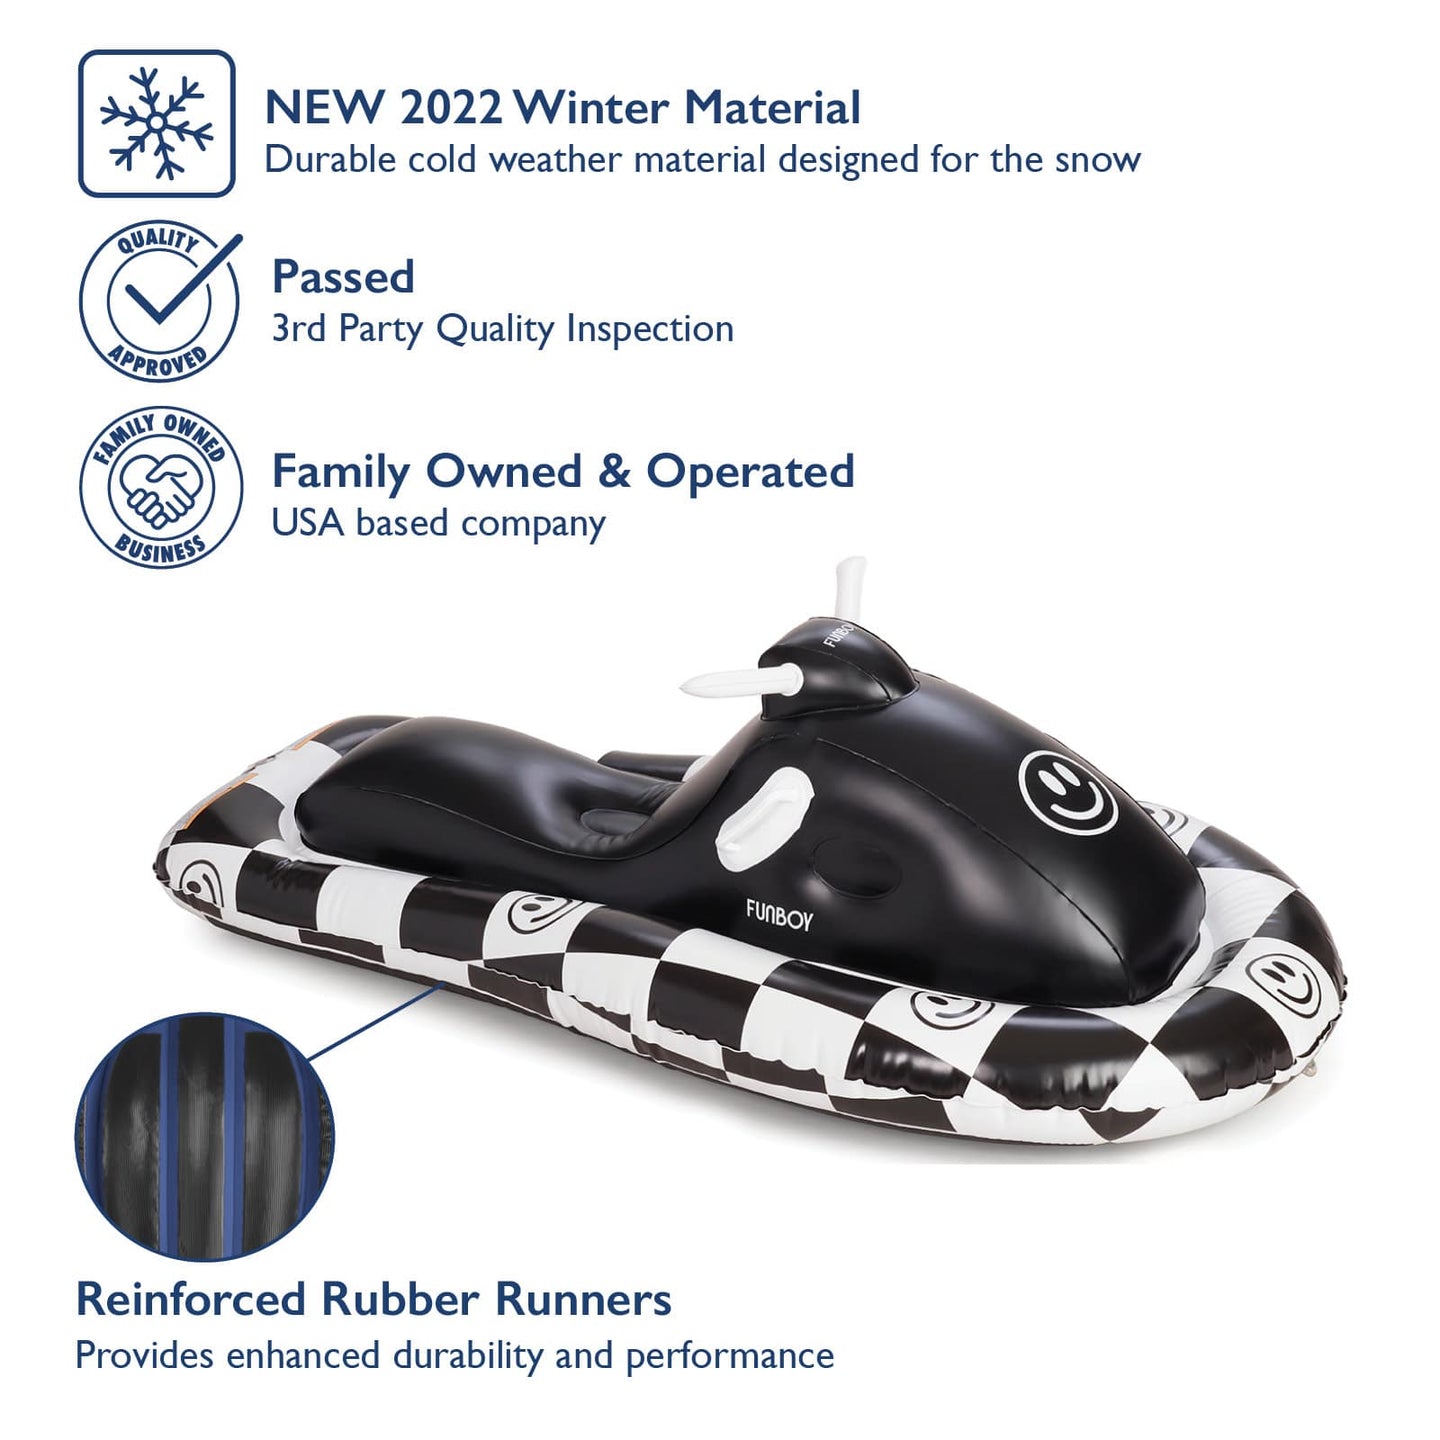 FUNBOY Winter Sled. New 2022 Winter Material. Durable cold weather material designed for snow. Passed 3rd Party Quality Inspection. Family Owned and Operated. USA Based. Reinforced Rubber Runners.  Provides enhanced durability and performance